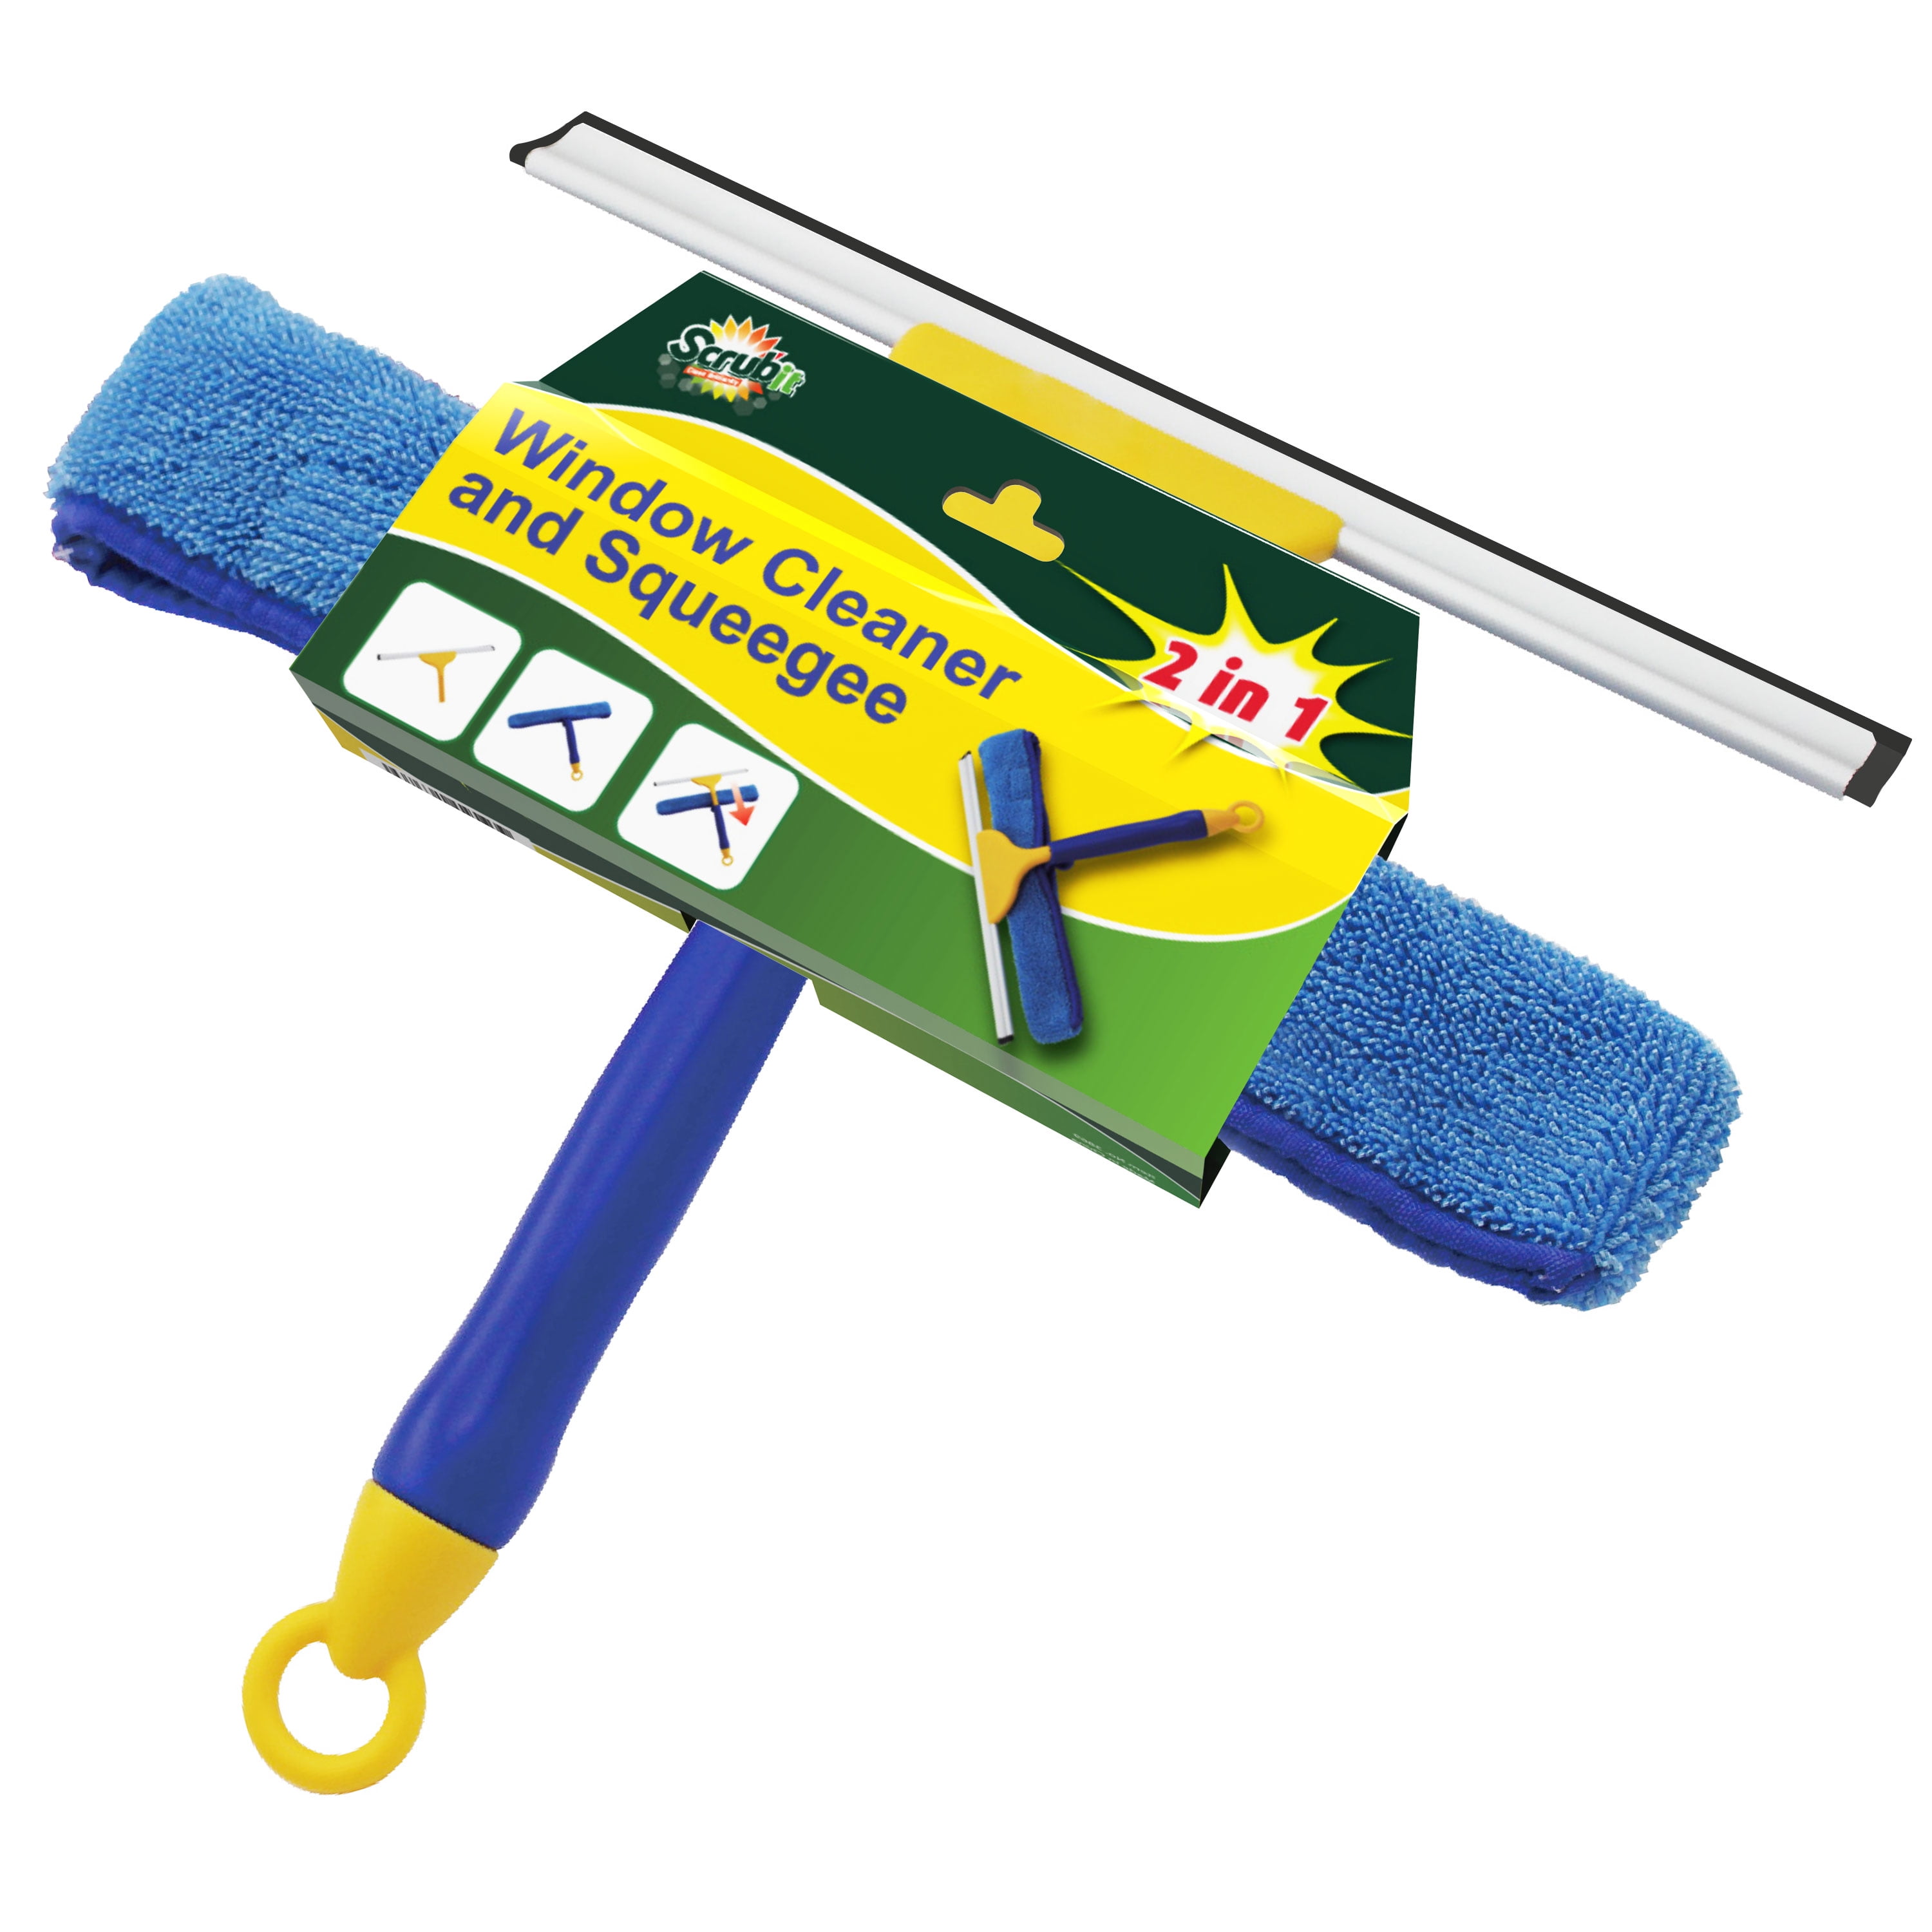 window cleaning suppliers